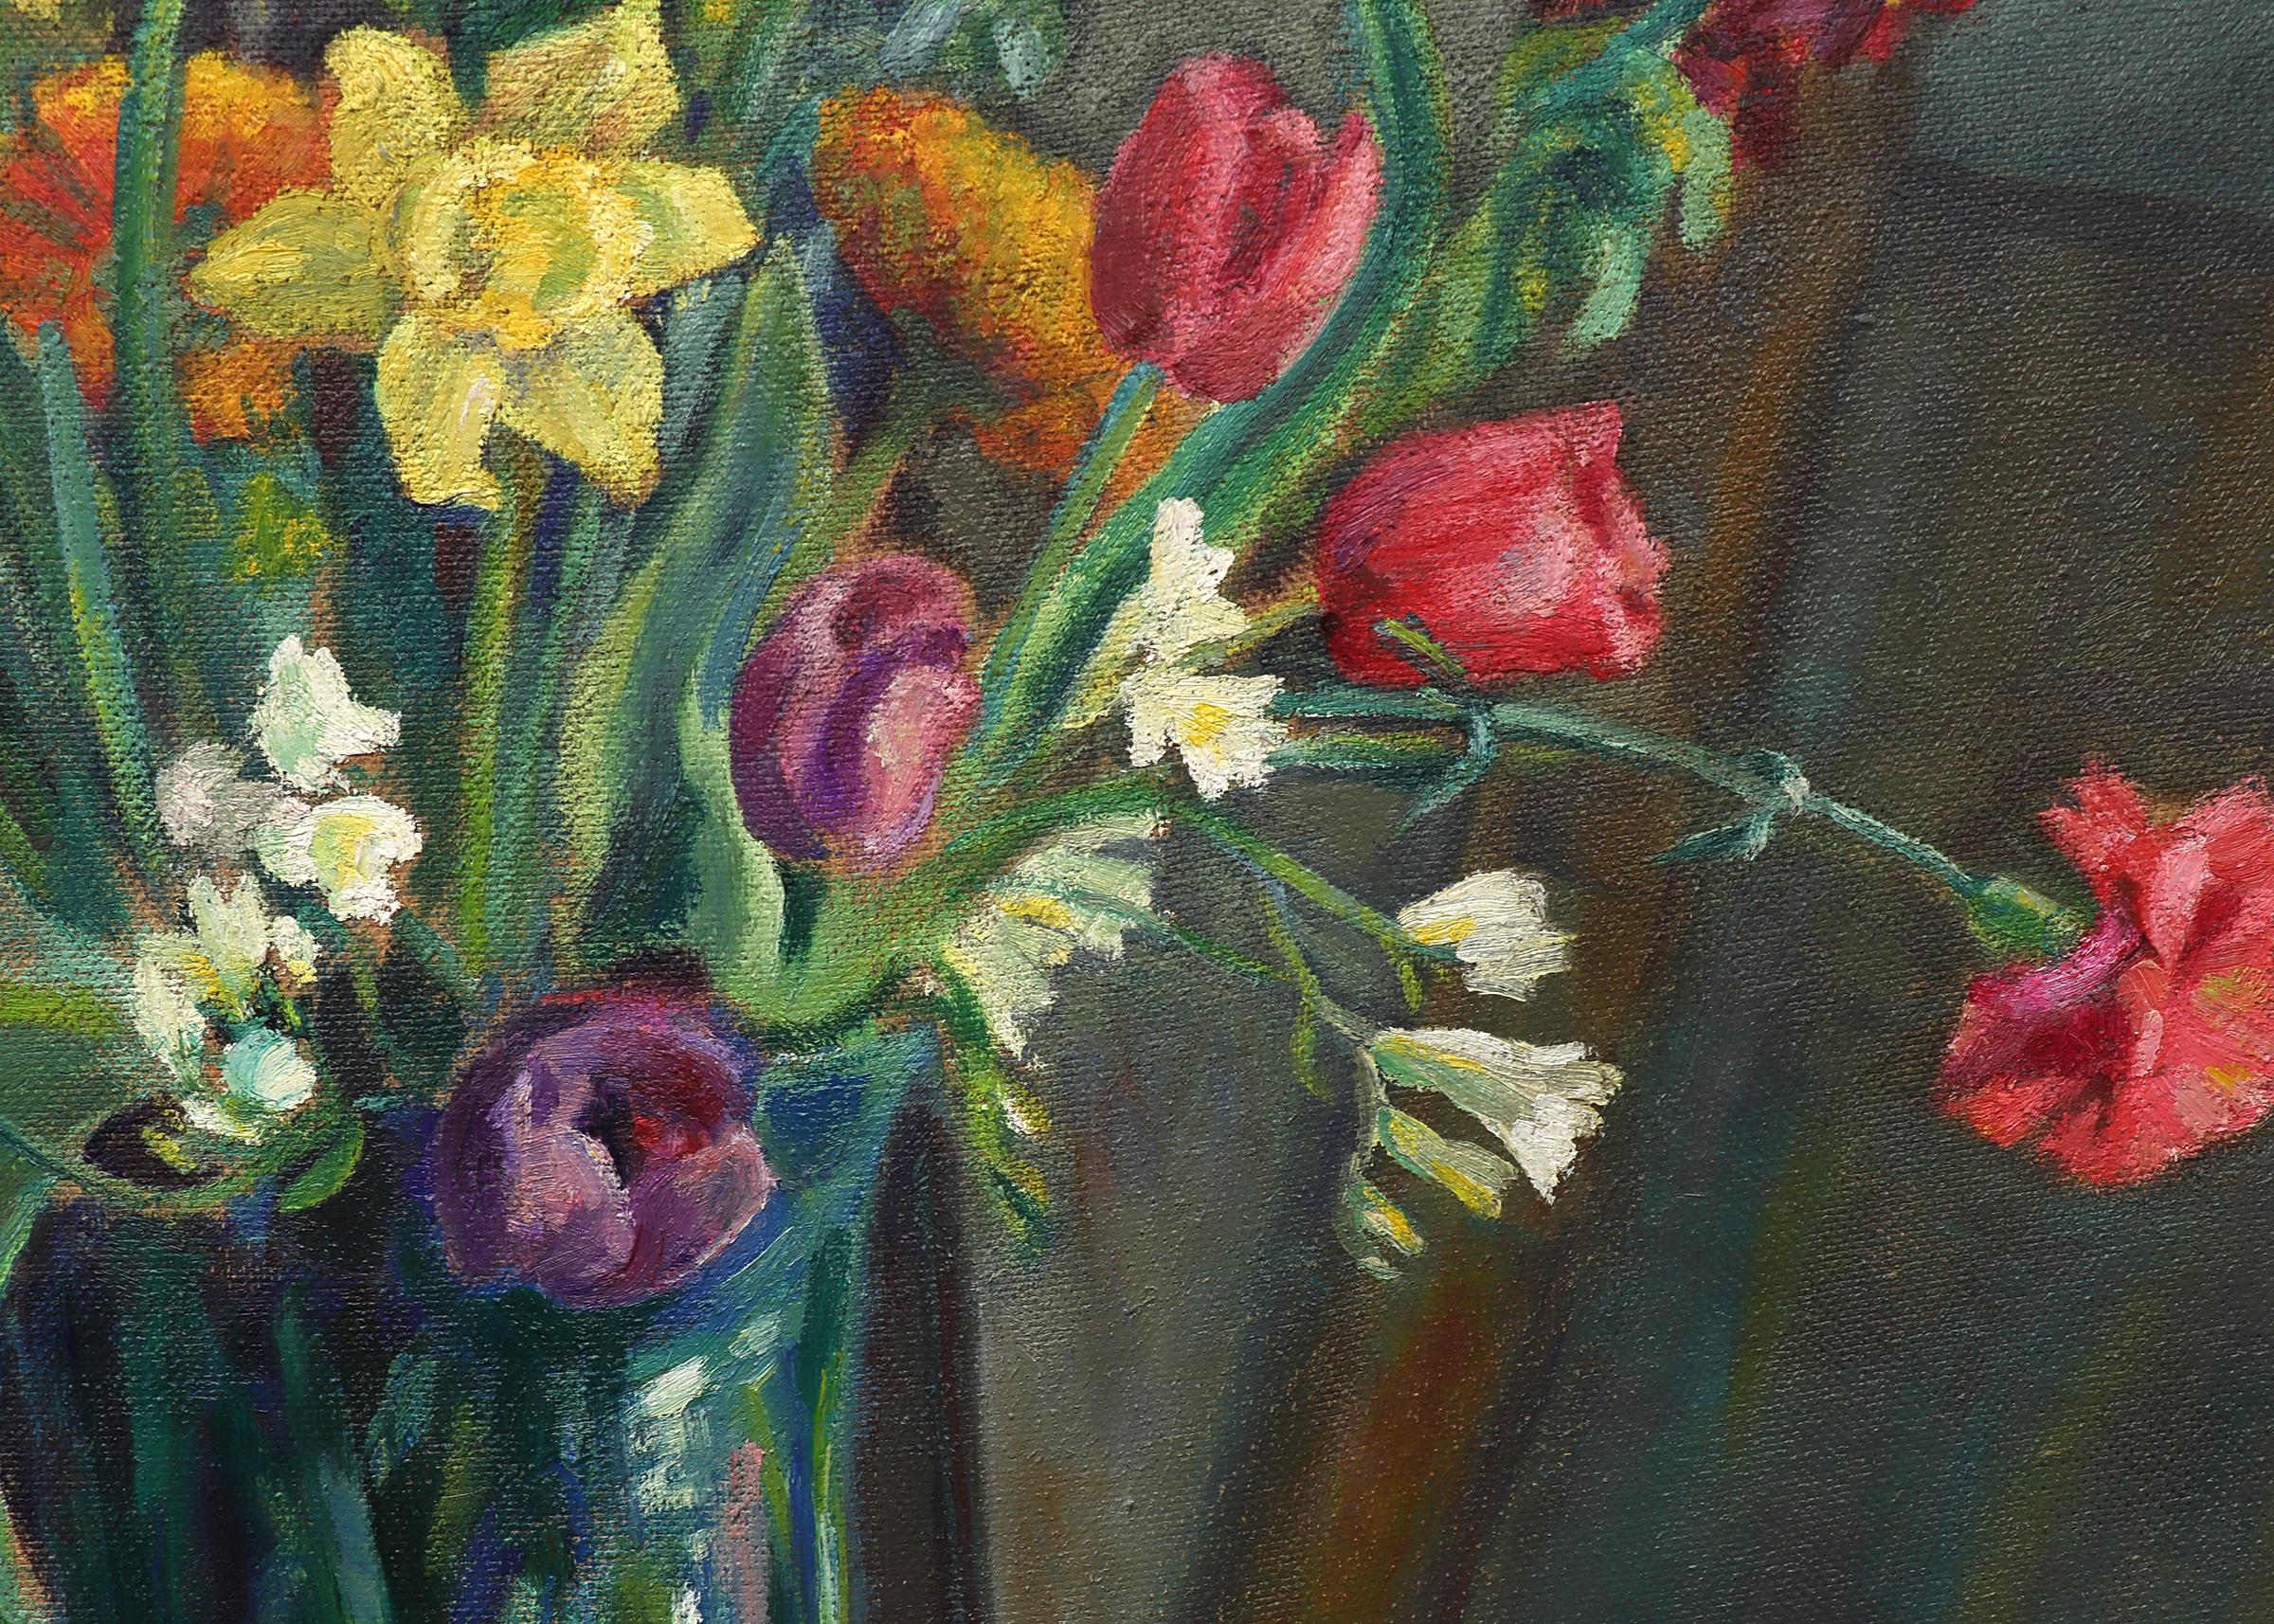 Oil on board painting from February 14, 1933 titled 'Flower Arrangement' is a still life with daffodils, tulips and snapdragons by Colorado artist Elisabeth Spalding. Presented in a custom gold frame, outer dimensions measure 37 ⅛ x 41 ⅛ x 1 ¾